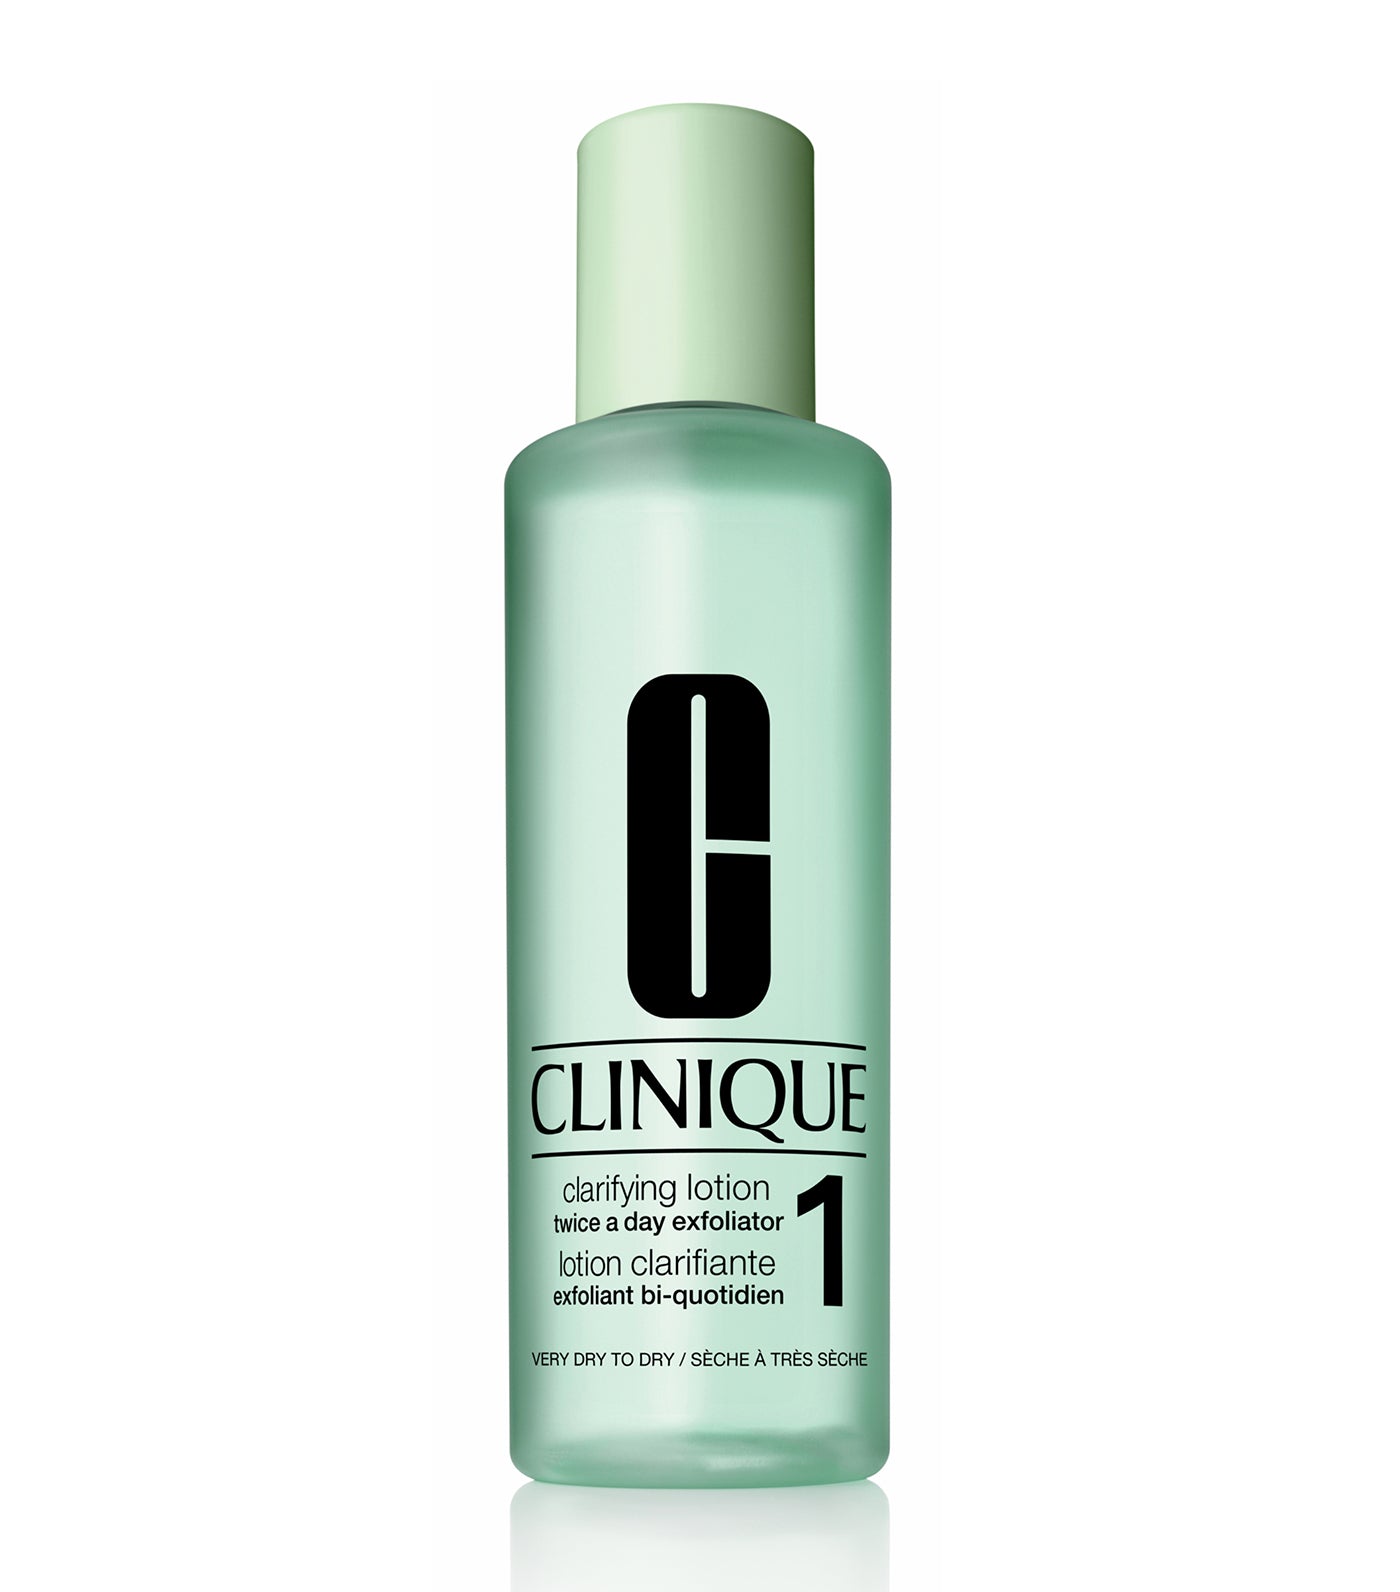 clinique skin type 1 clarifying lotion 1.0 twice a day exfoliator